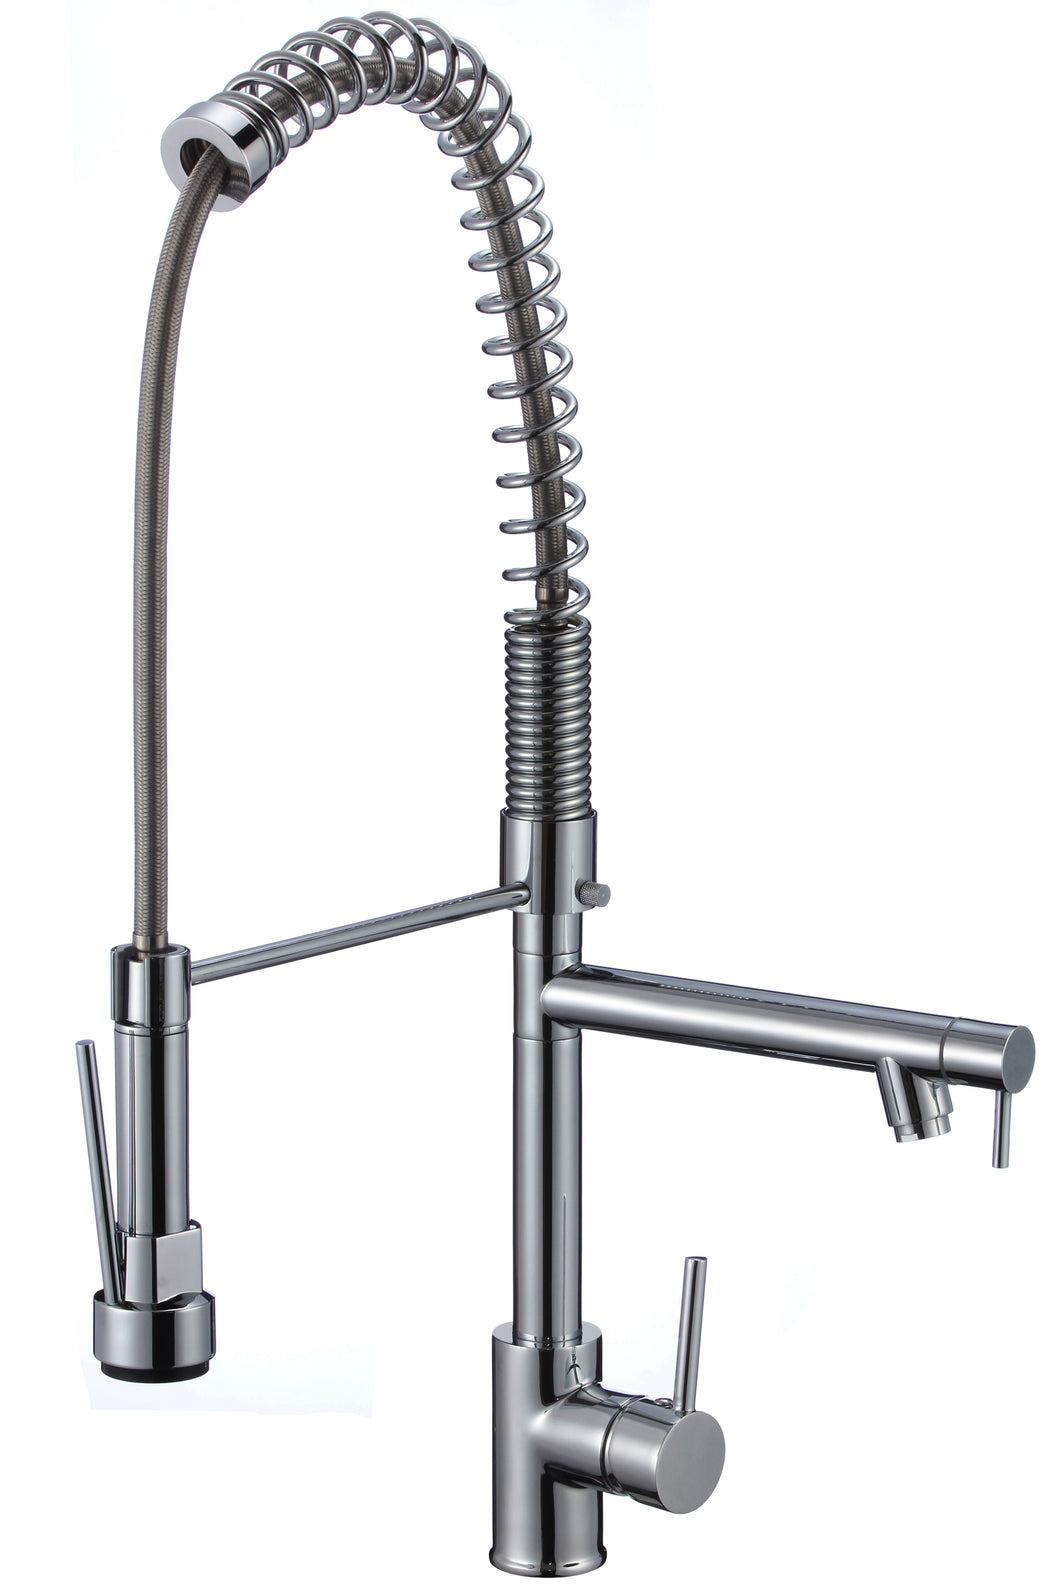 Pull Down Spring Kitchen Faucet with Pot Filler #KF-82H35